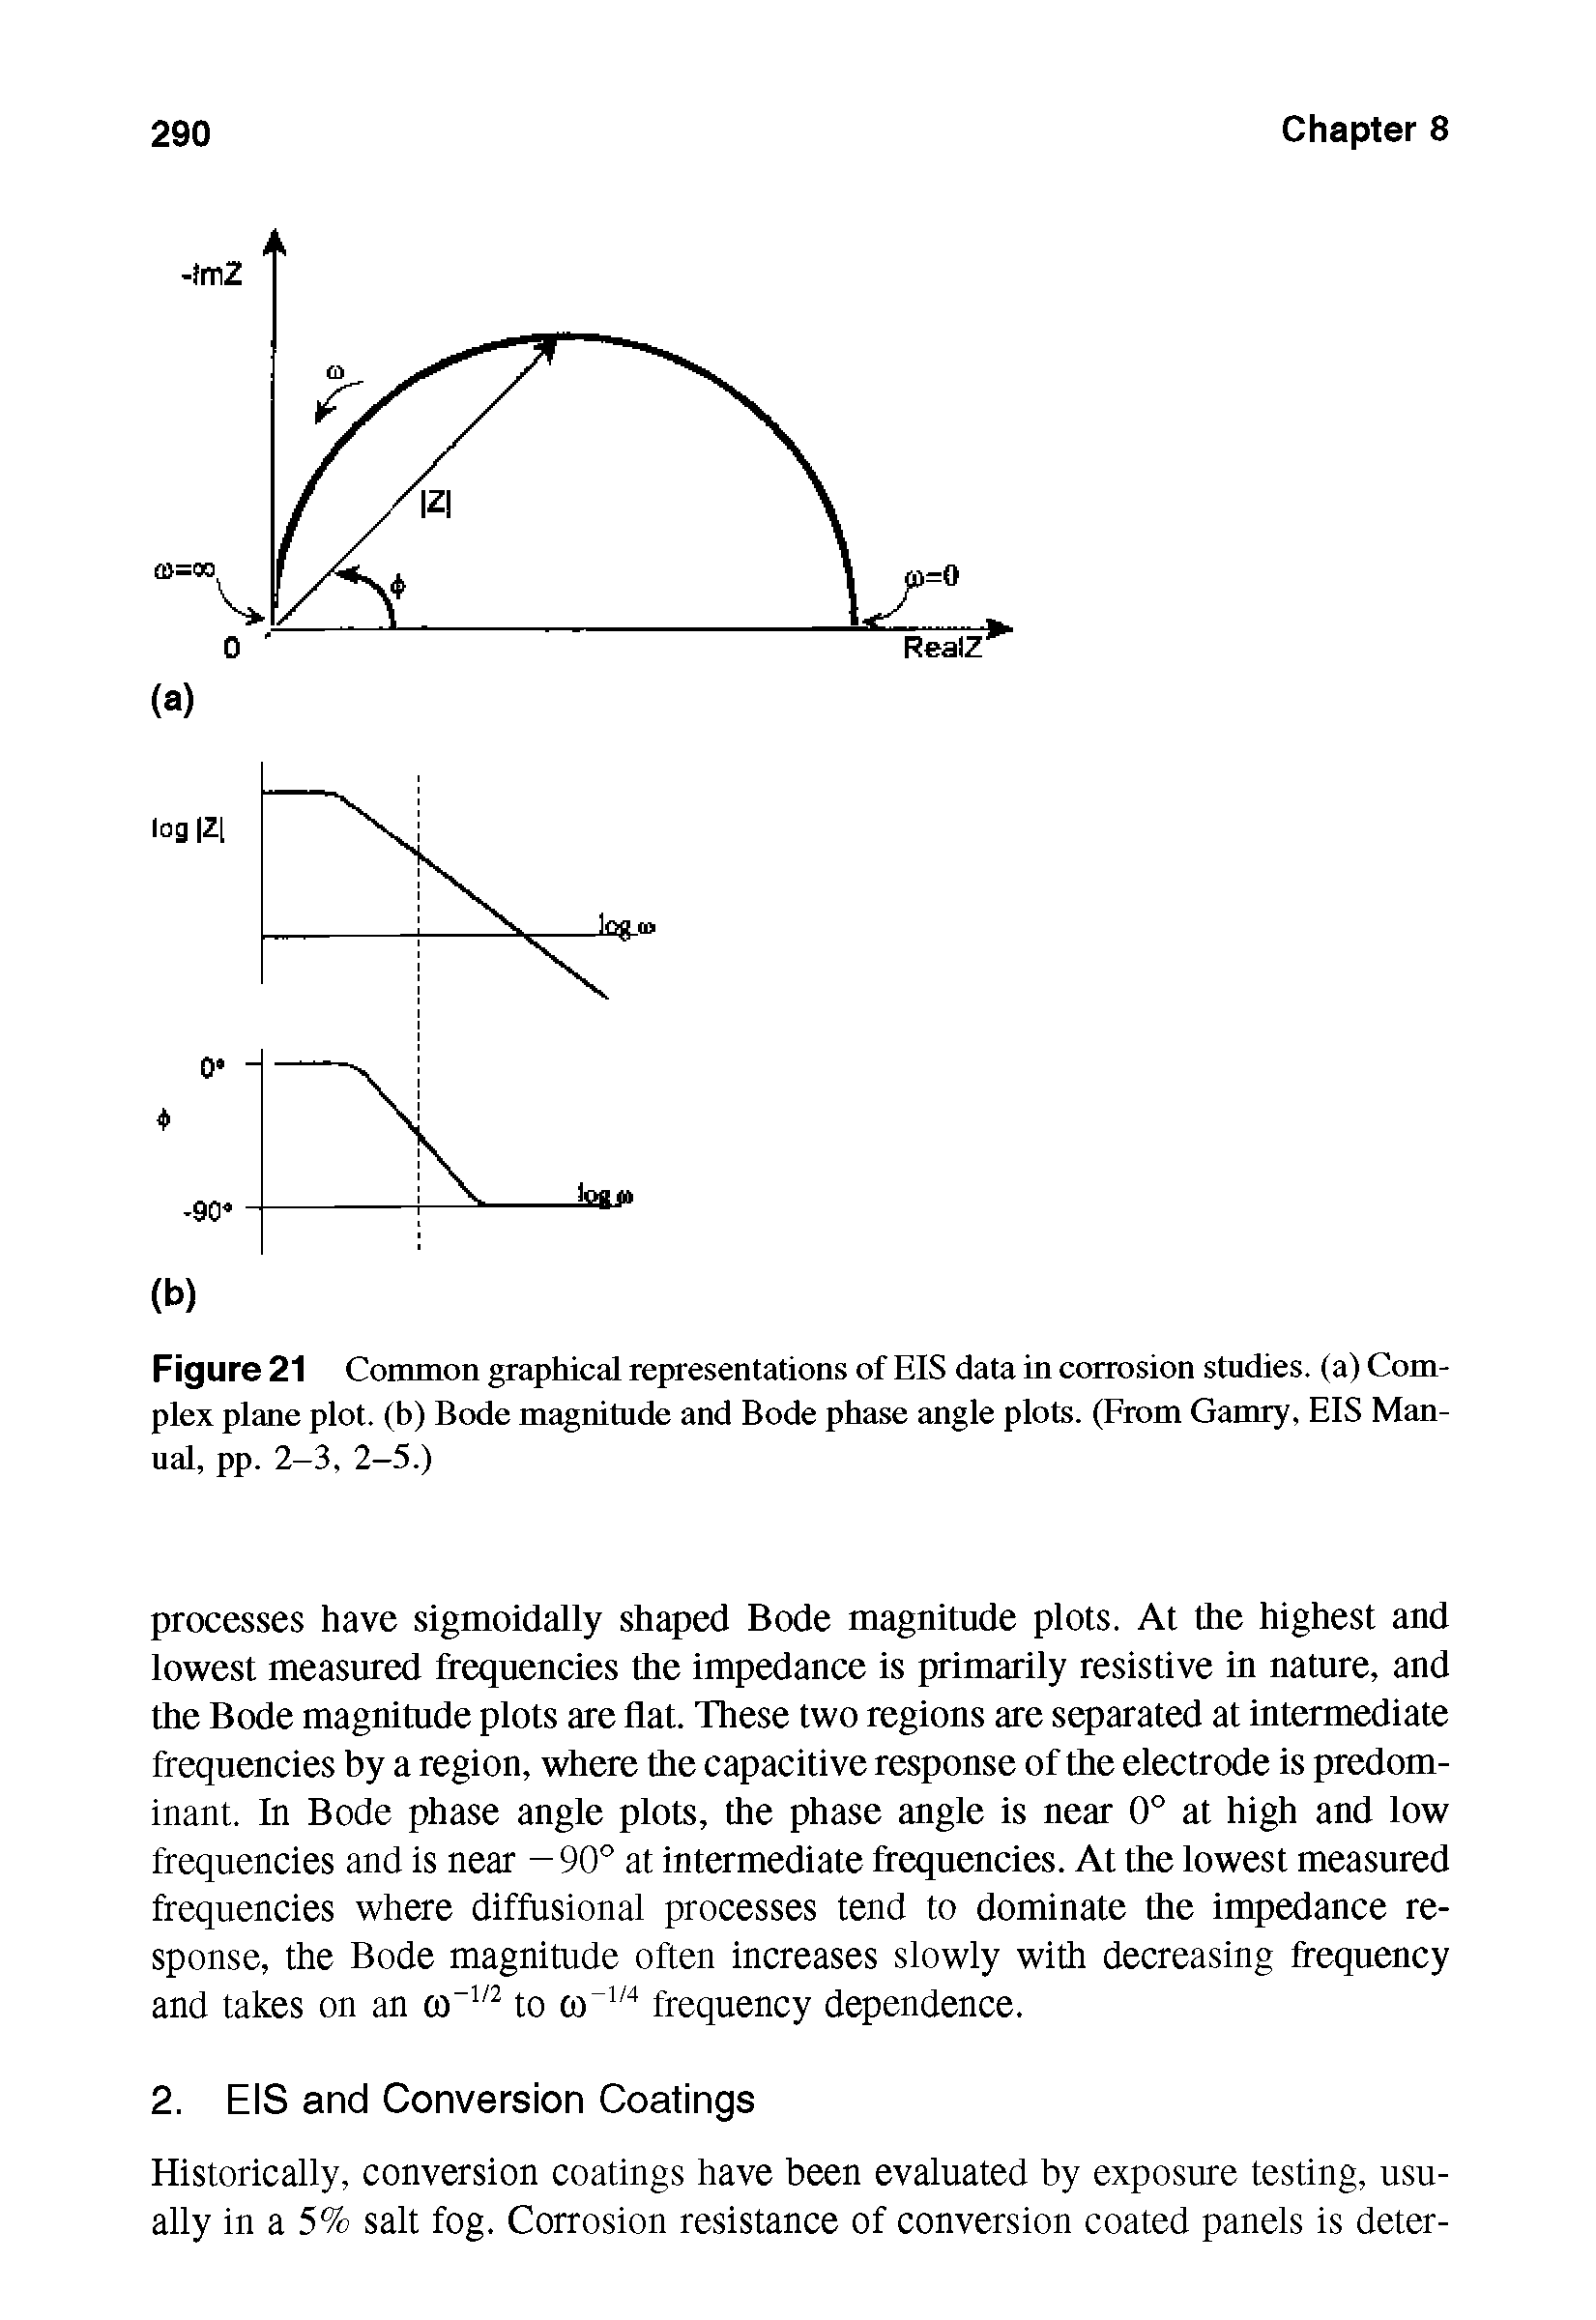 Figure 21 Common graphical representations of EIS data in corrosion studies, (a) Complex plane plot, (b) Bode magnitude and Bode phase angle plots. (From Gamry, EIS Manual, pp. 2-3, 2-5.)...